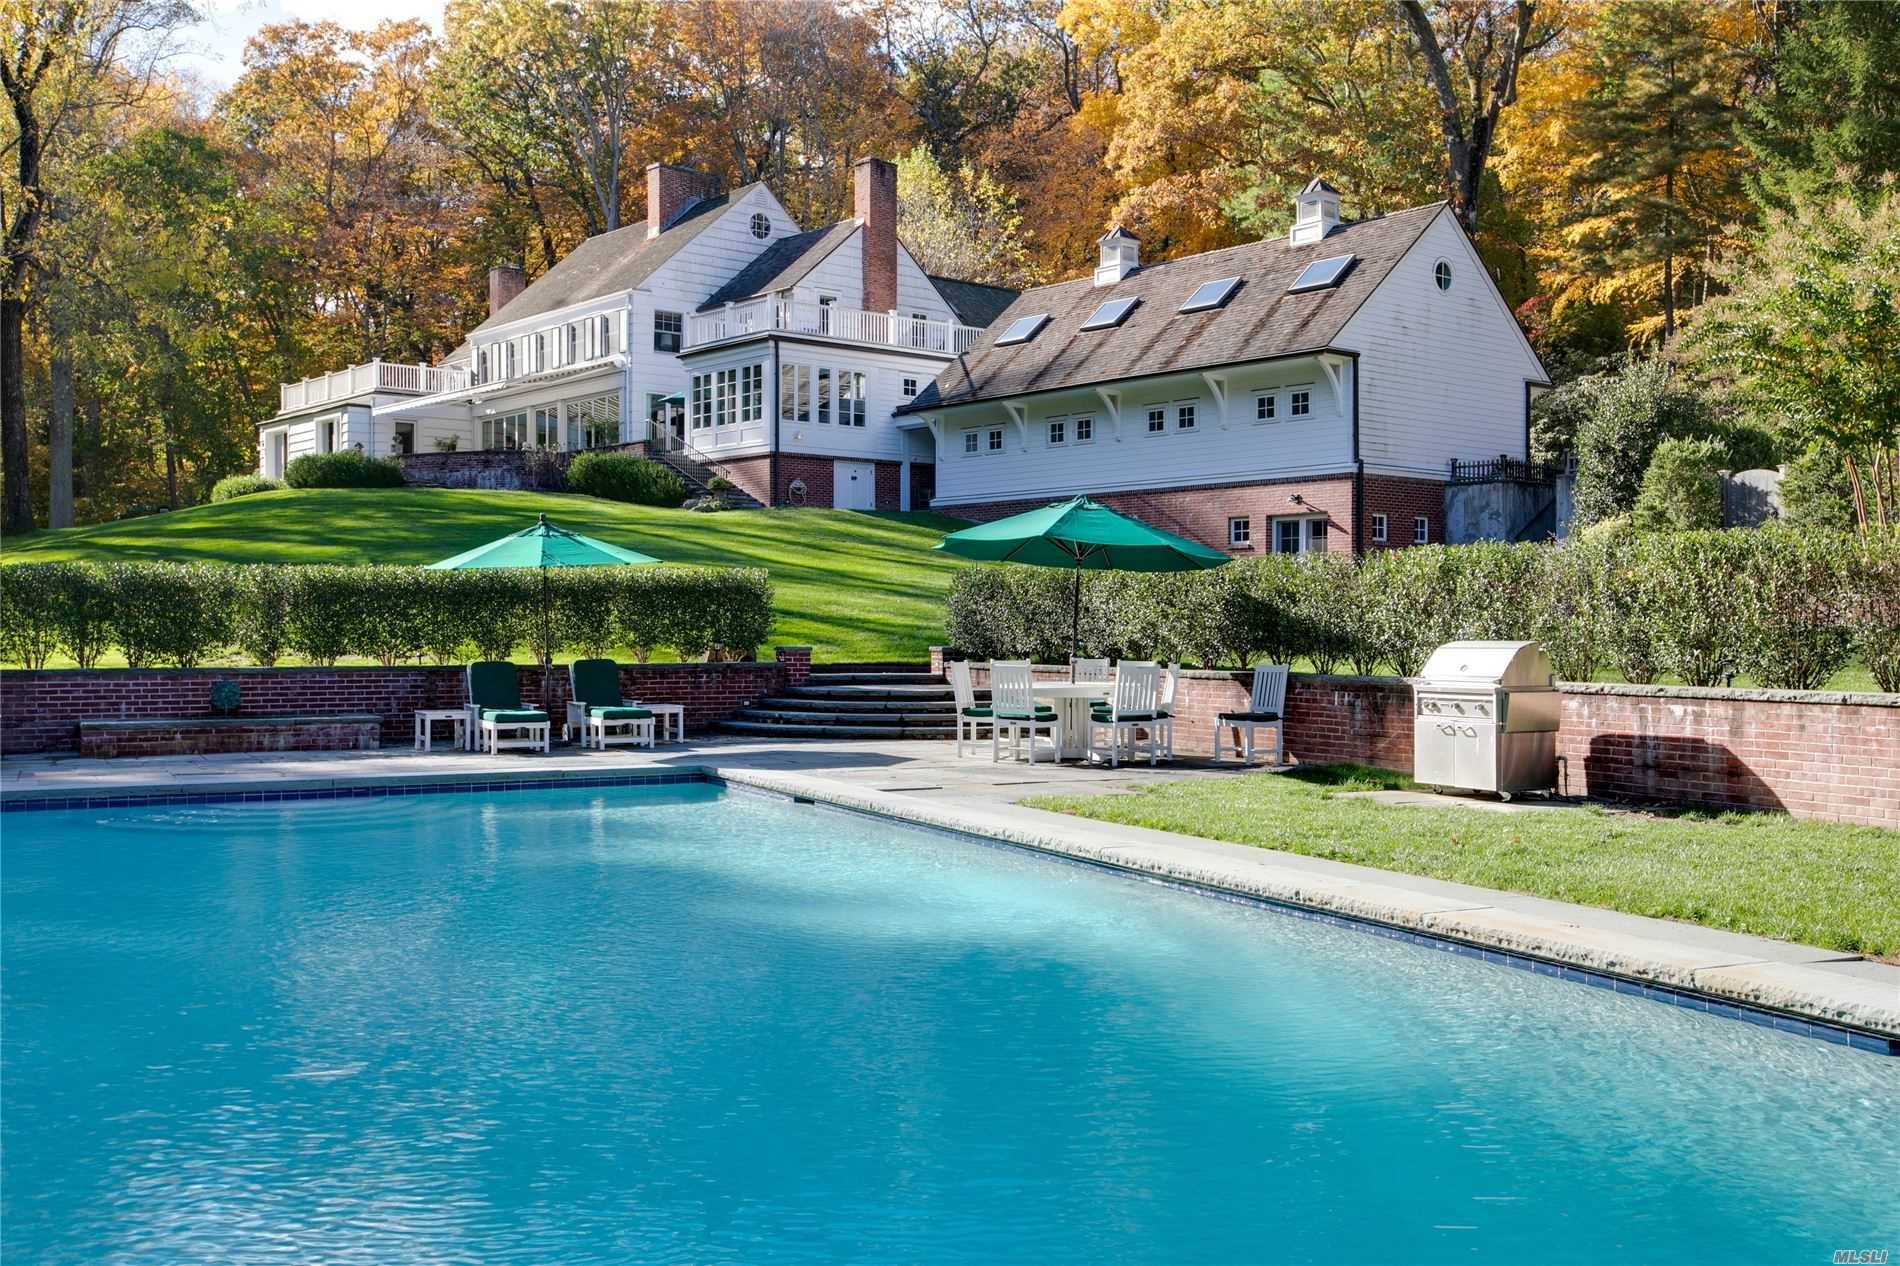 Spectacular Bradley Delehanty designed country oasis in the heart of Matinecock minutes from the quaint shopping village of Locust Valley.